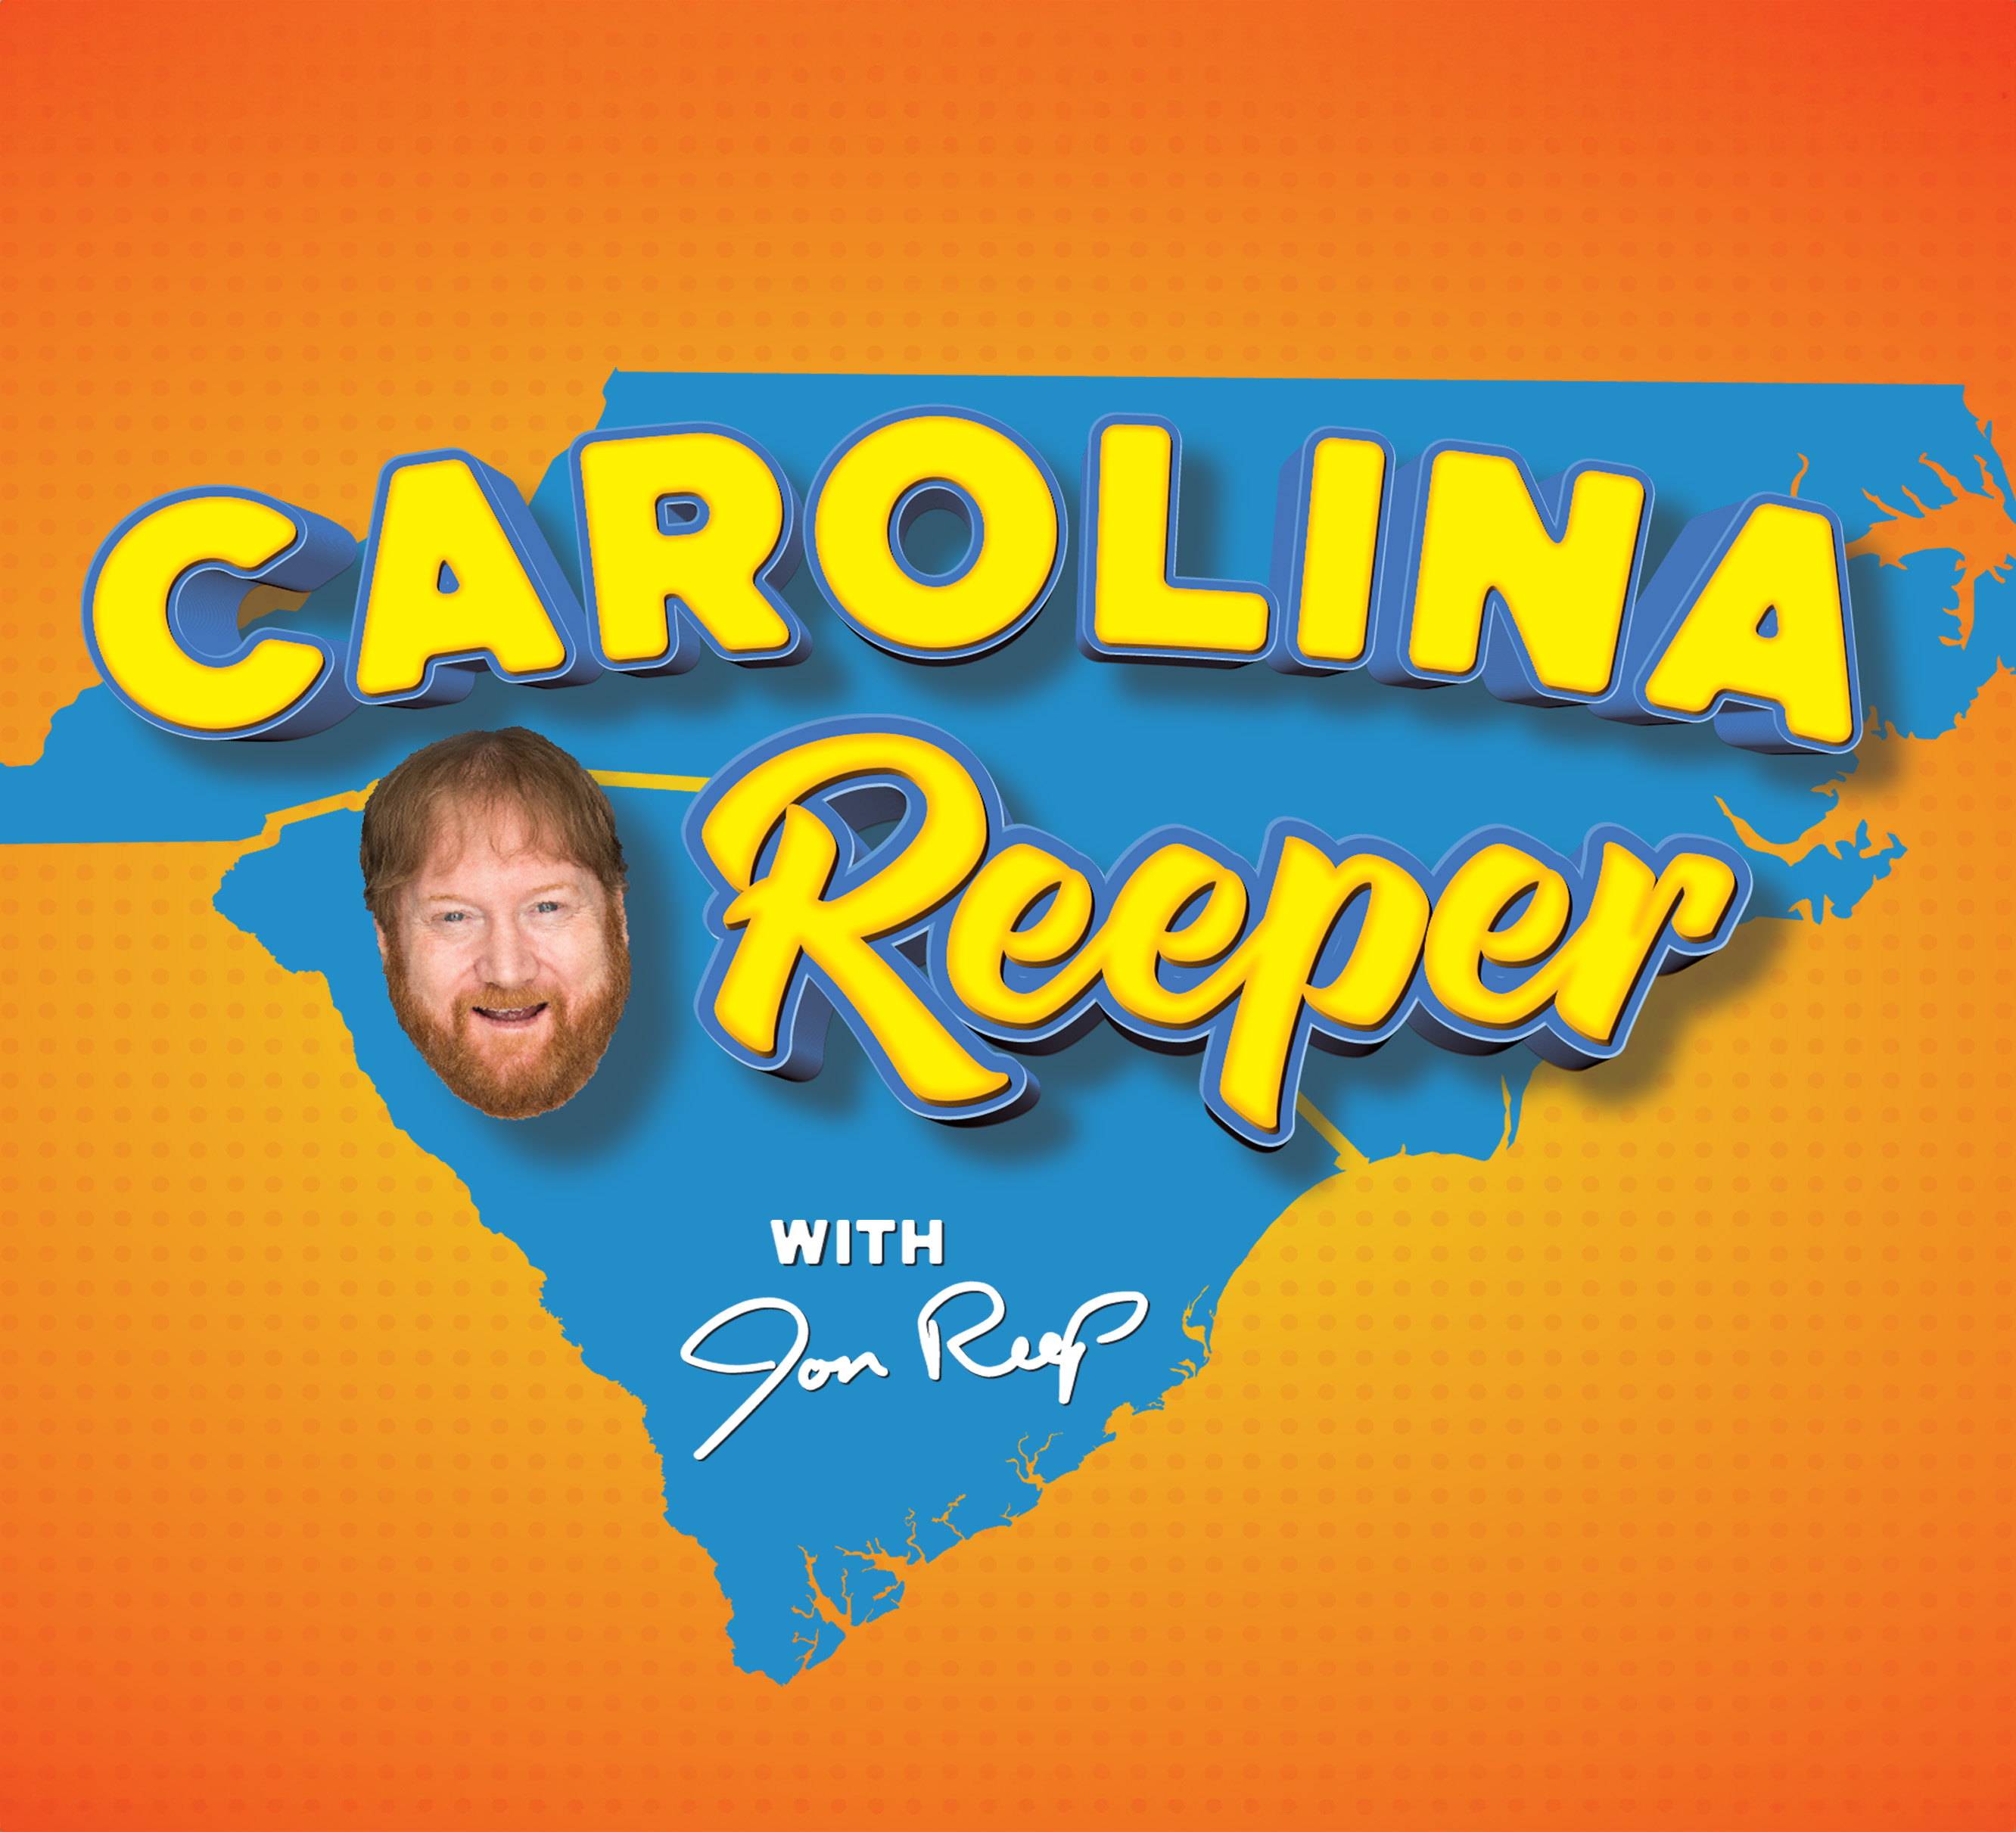 You're Fired! Carolina Panthers, Dolly Parton, NC State, and My Thanksgiving Feast!